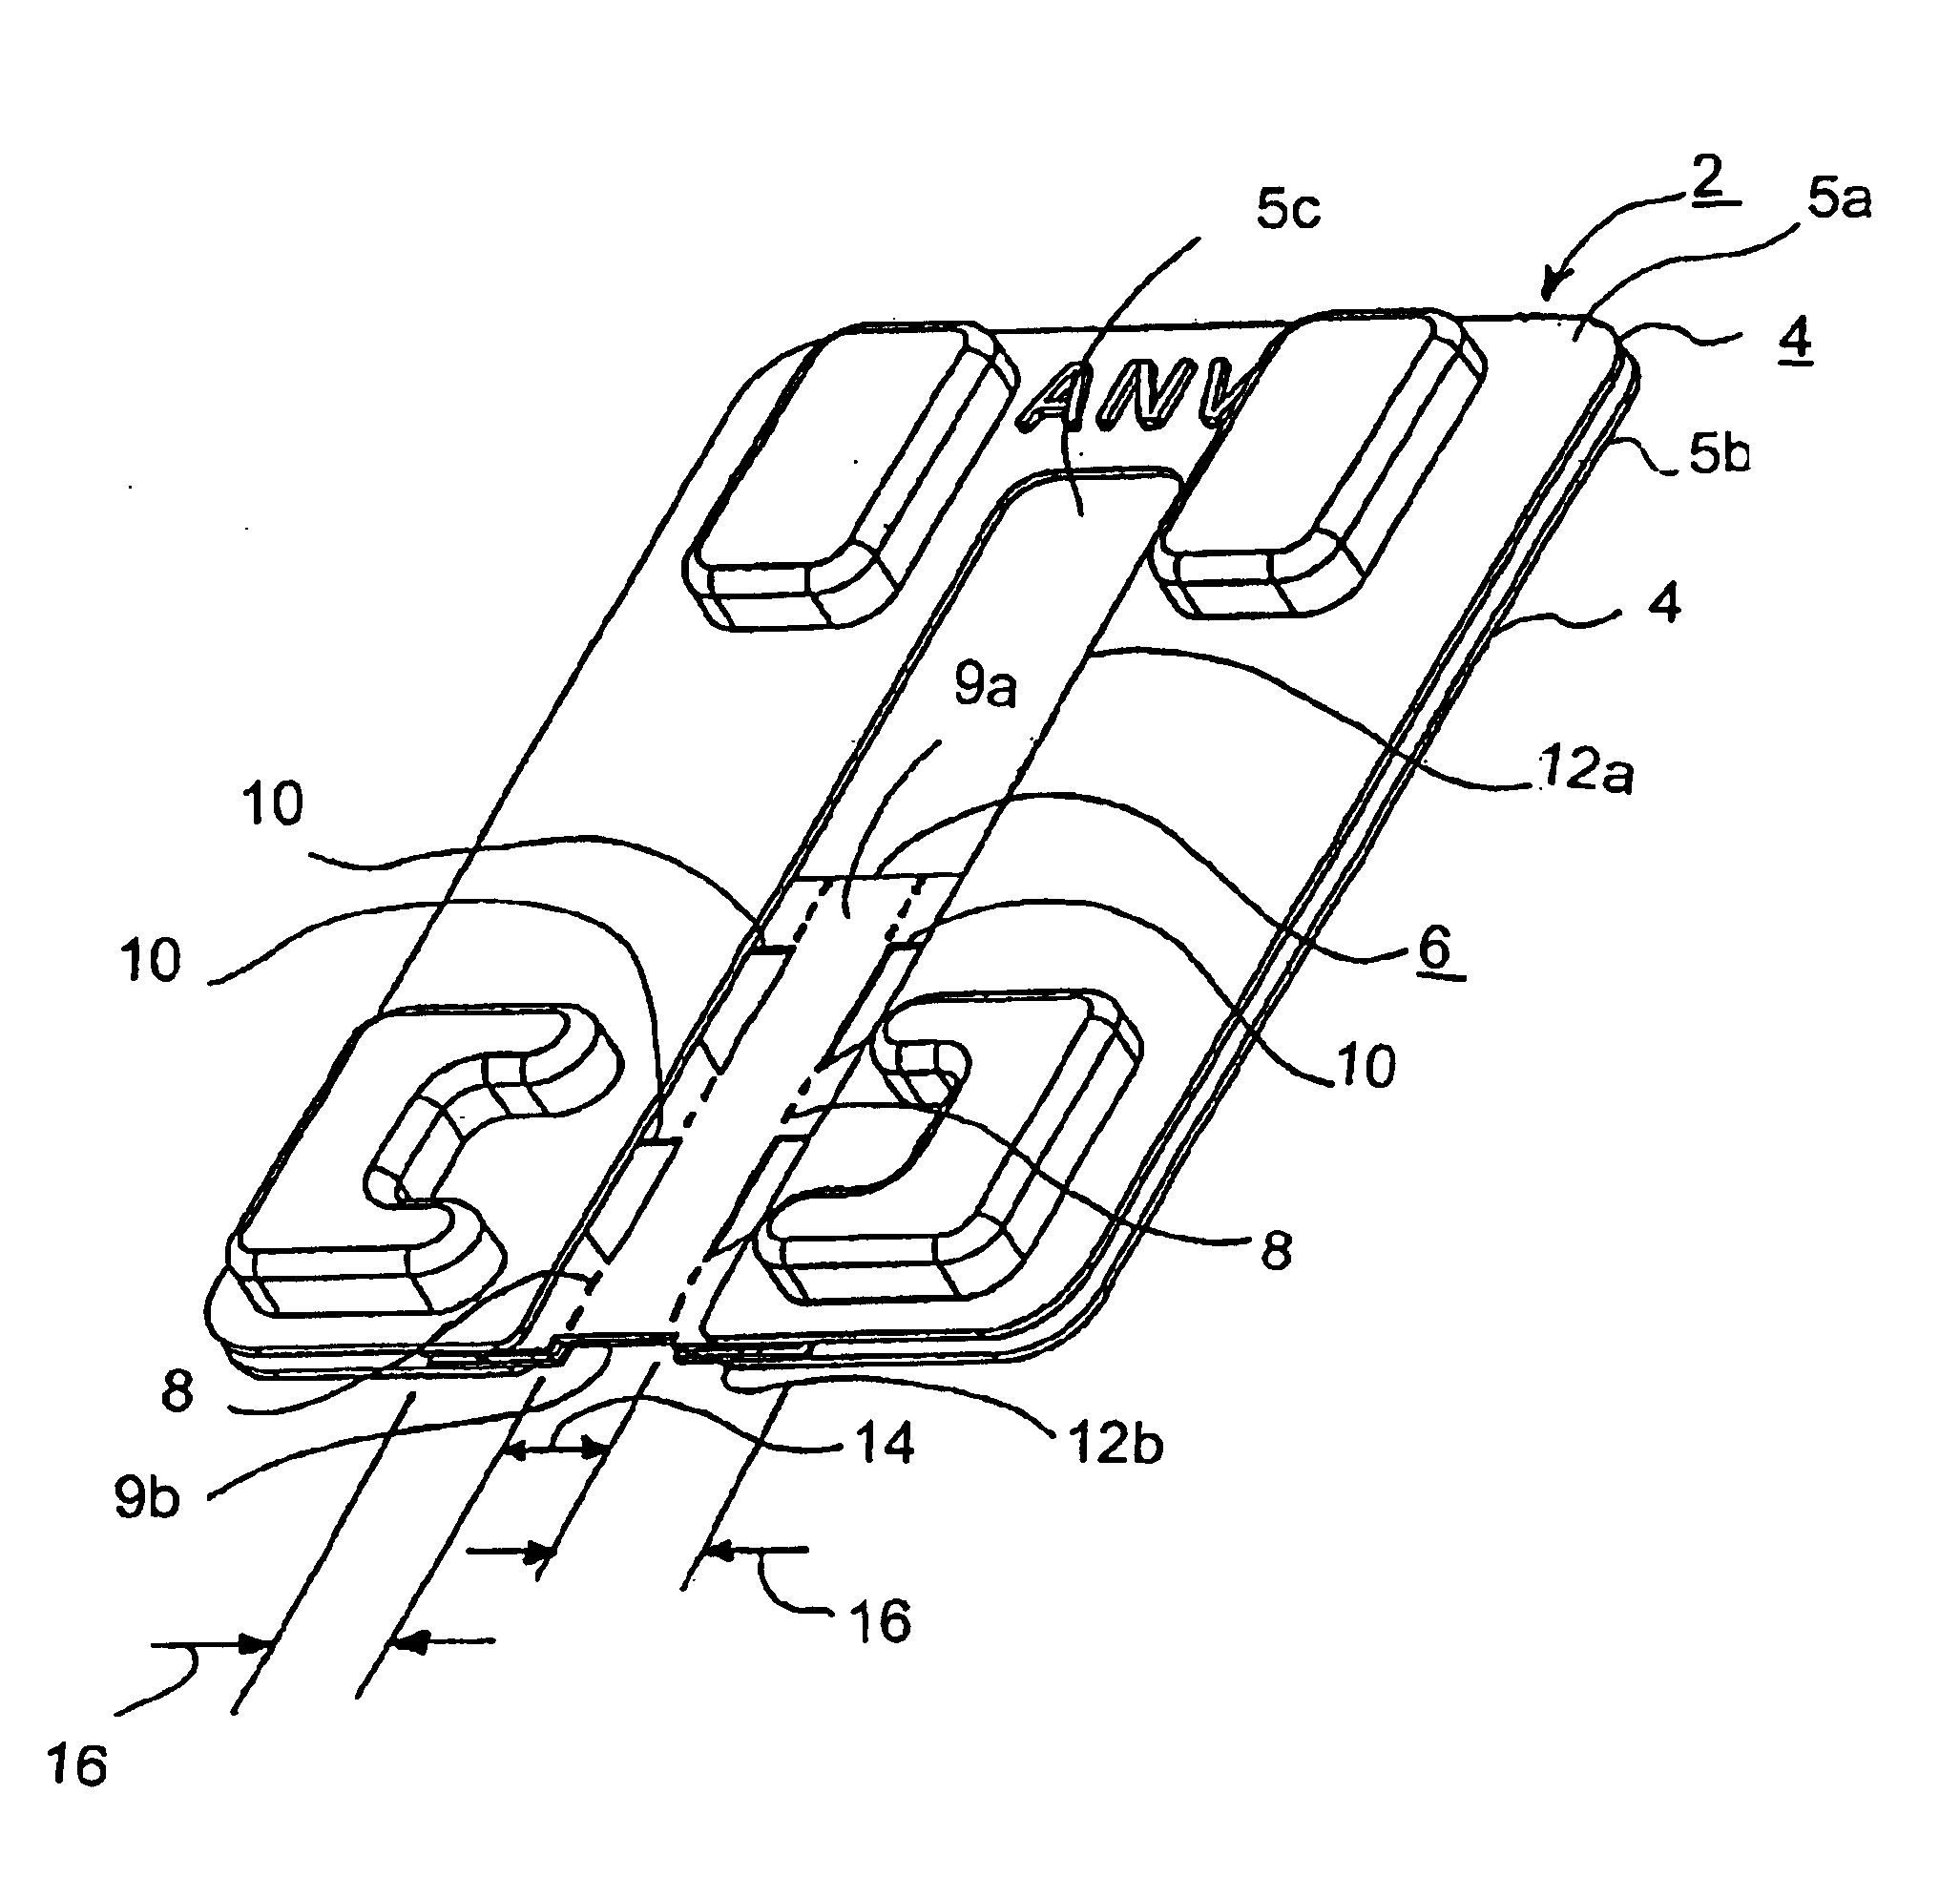 Apparatus and method for applying reinforcement material to a surgical stapler